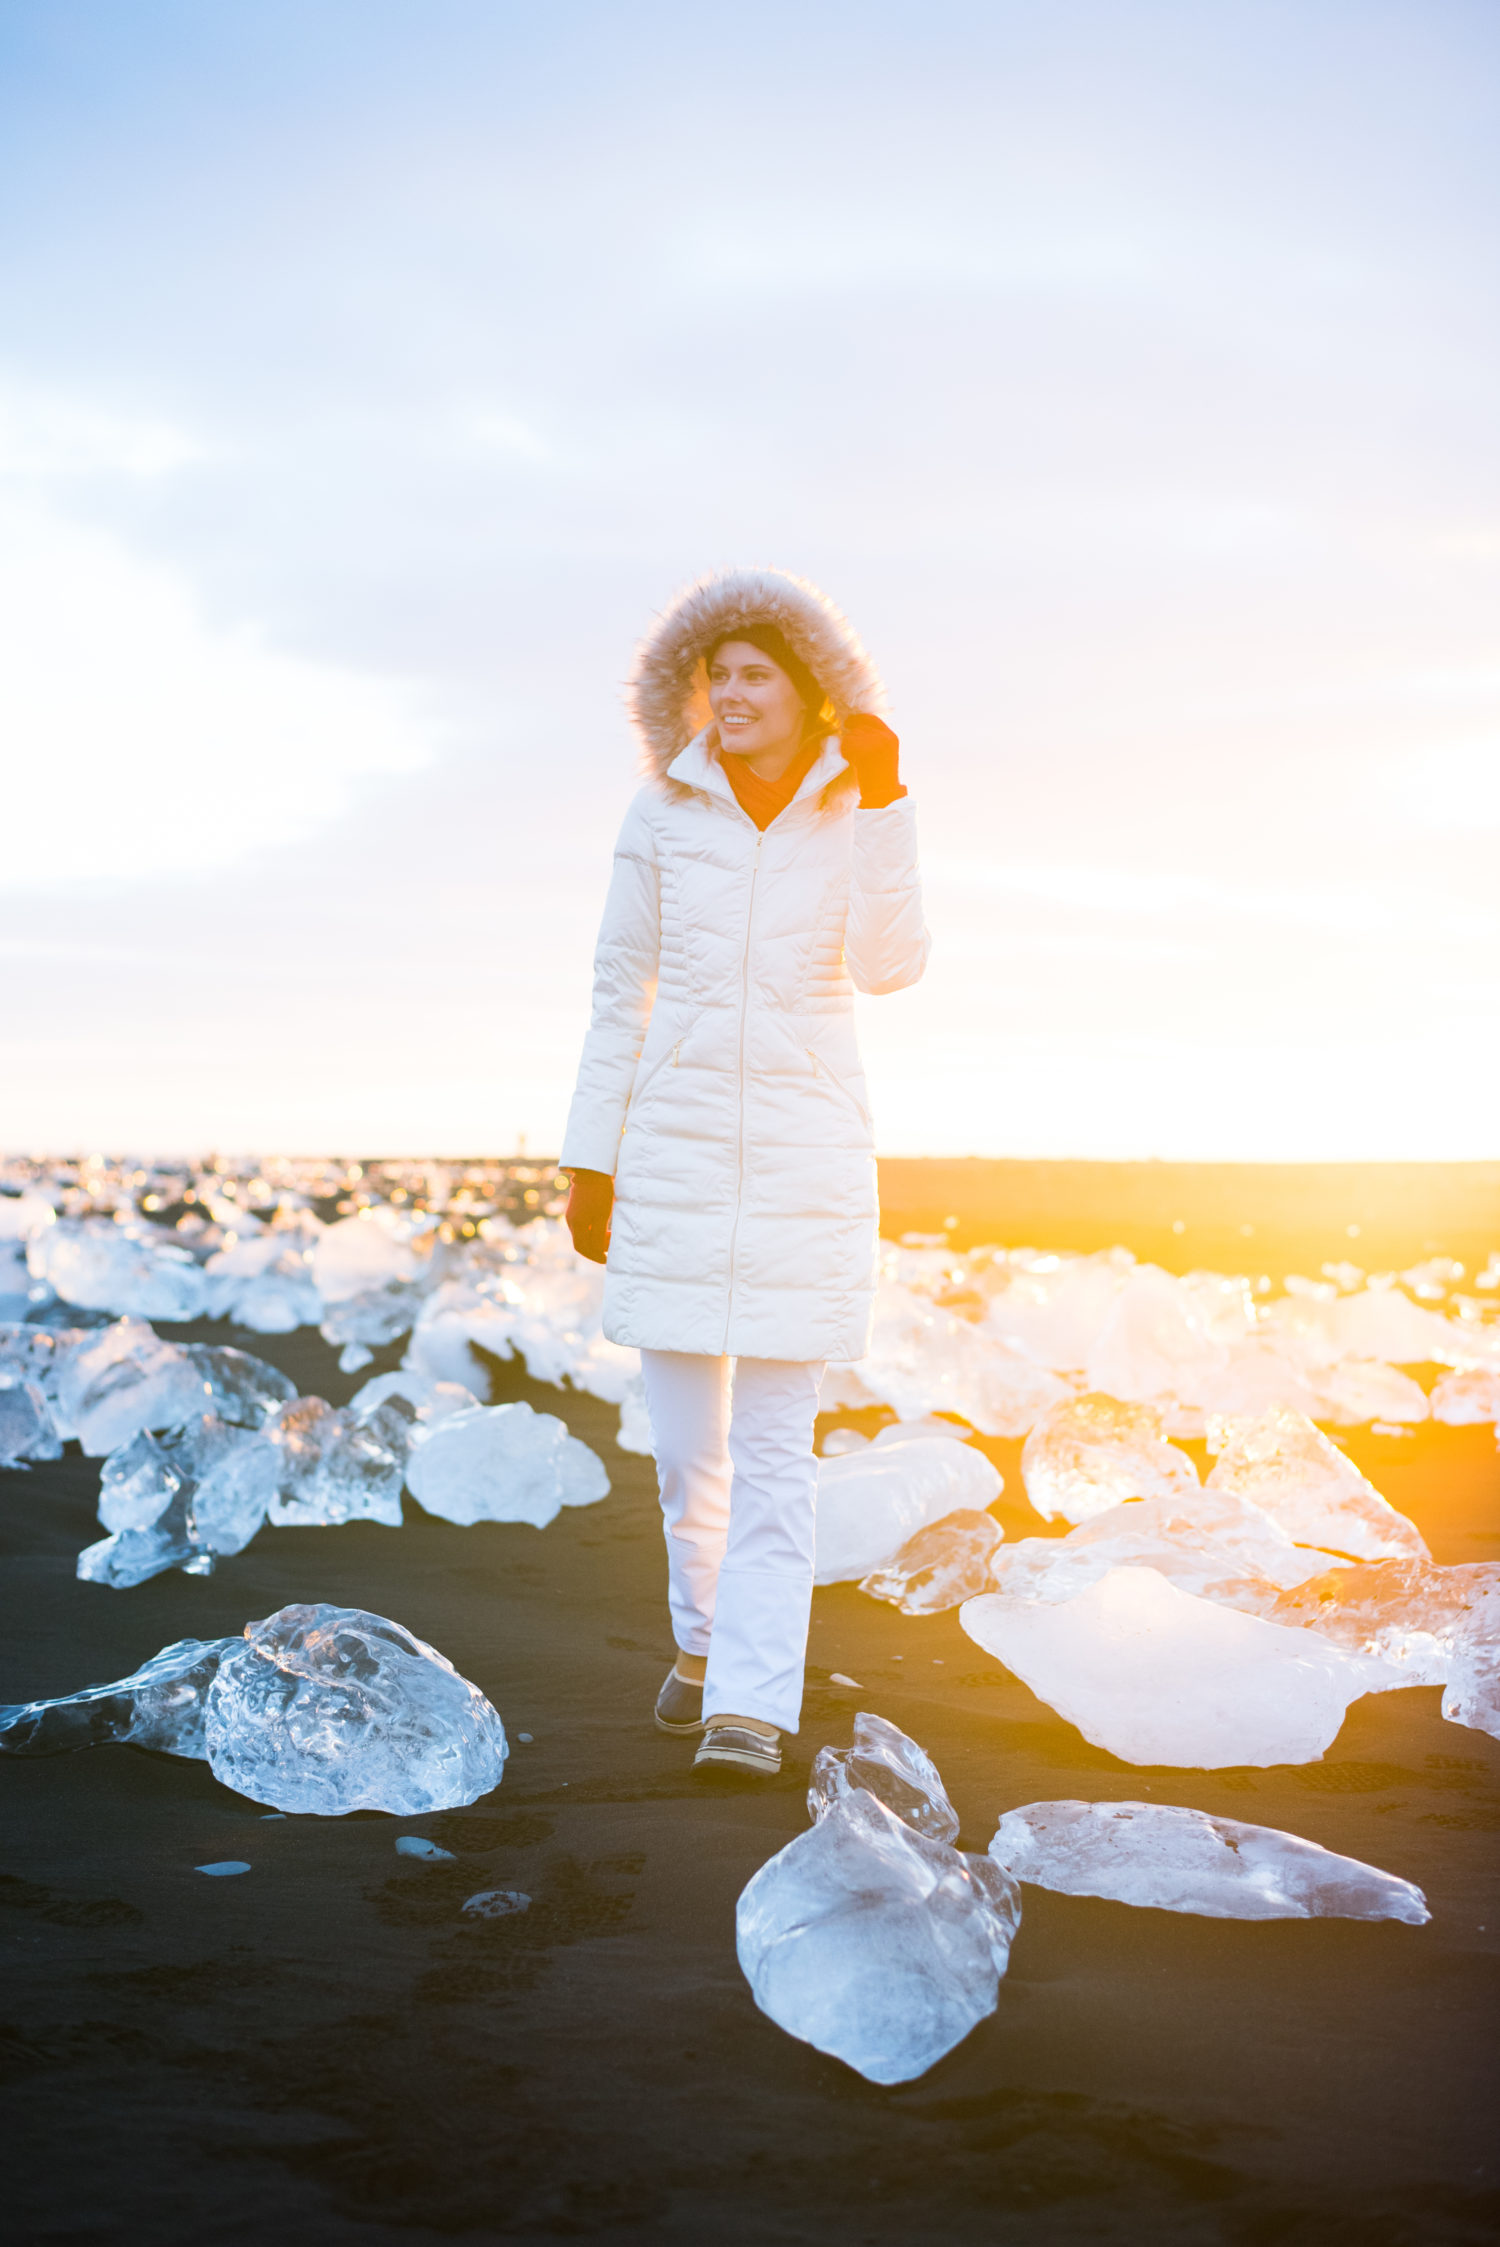 Miss USA 2011 Alyssa Campanella of The A List blog wearing Ellen Tracy faux fur coat and Sorel Caribou boots and North Face APEX snow pants in Jökullsárlón, Iceland